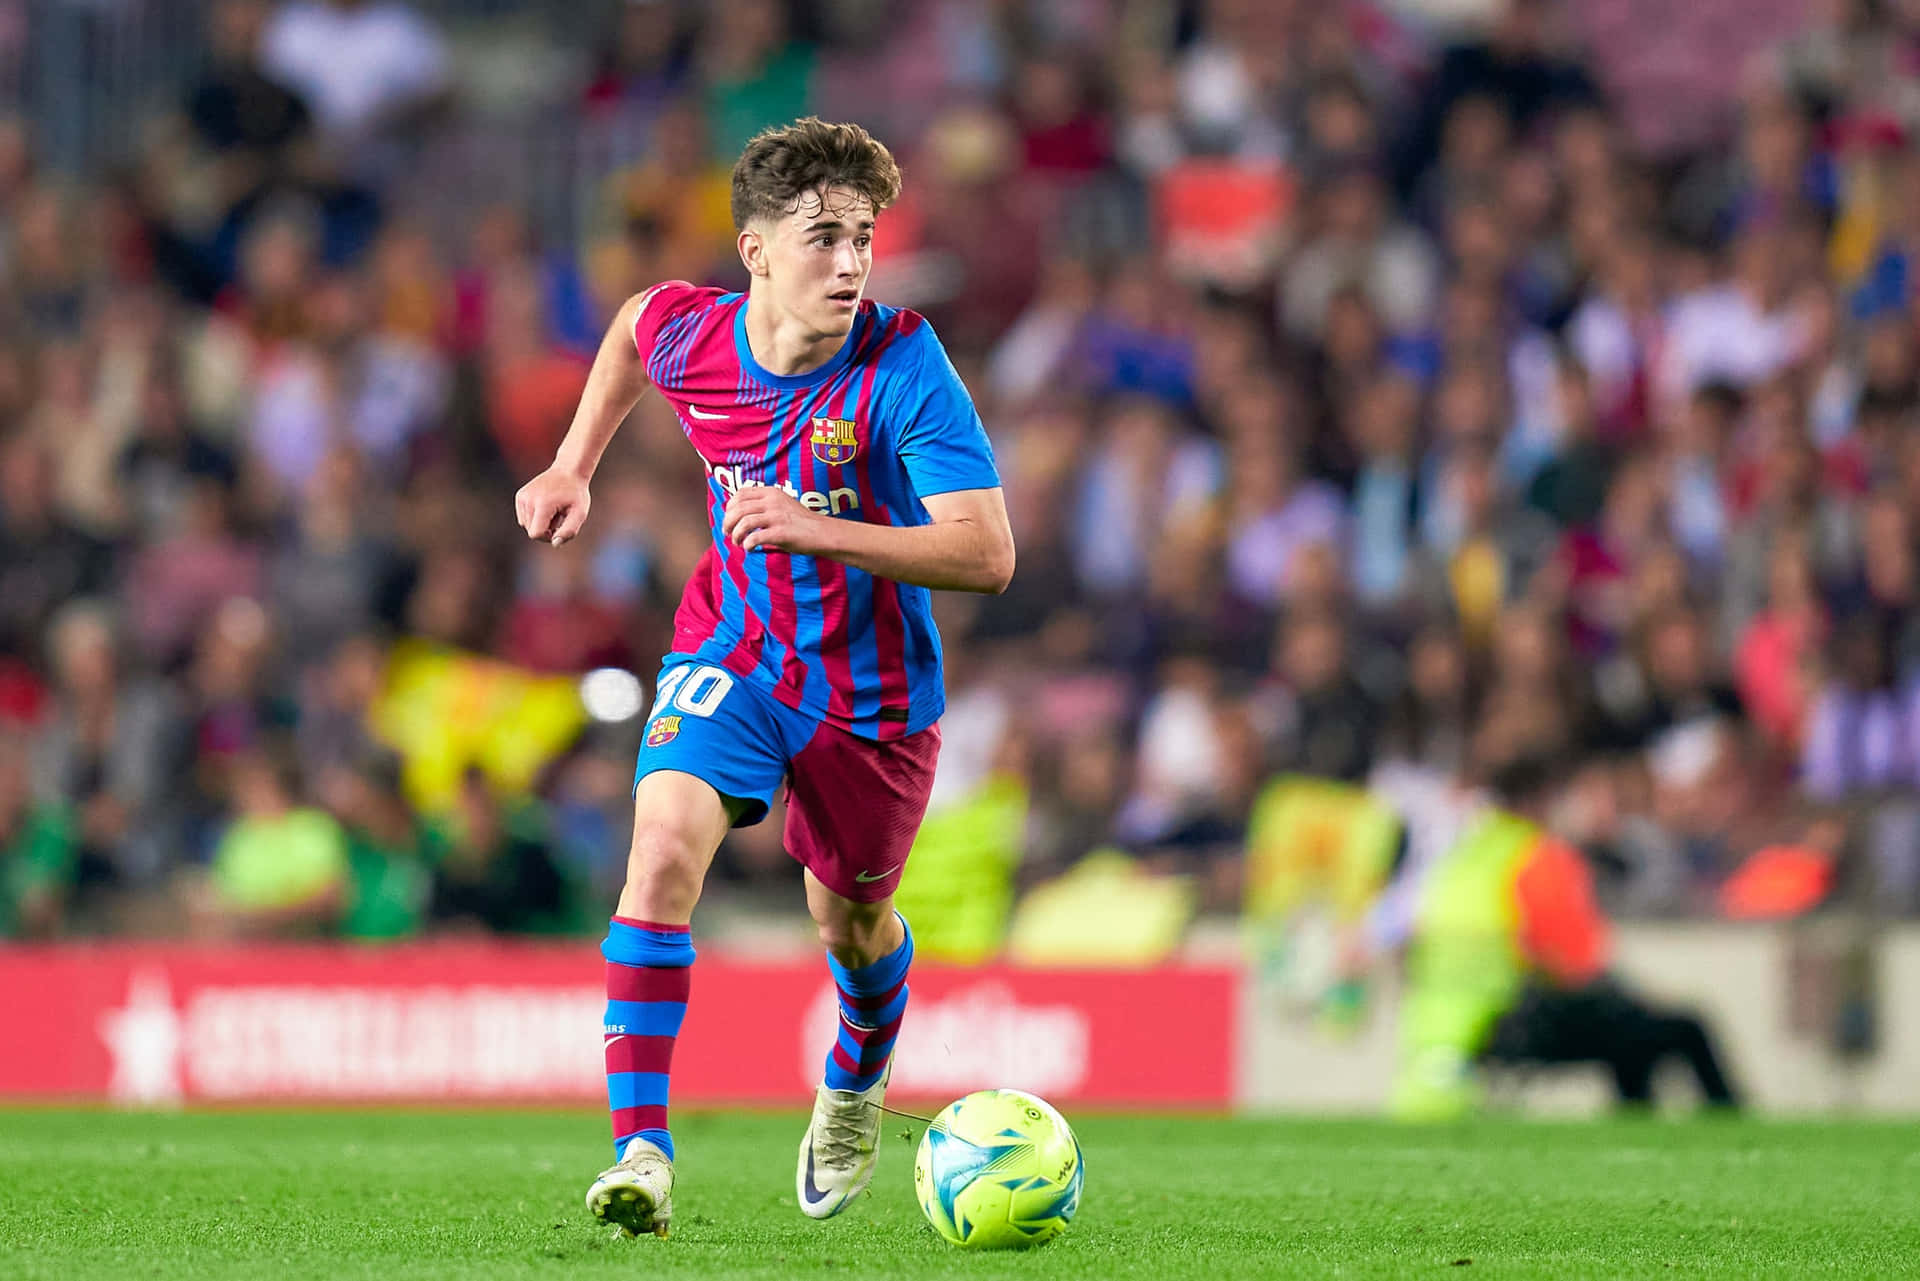 F C Barcelona Young Talentin Action Wallpaper